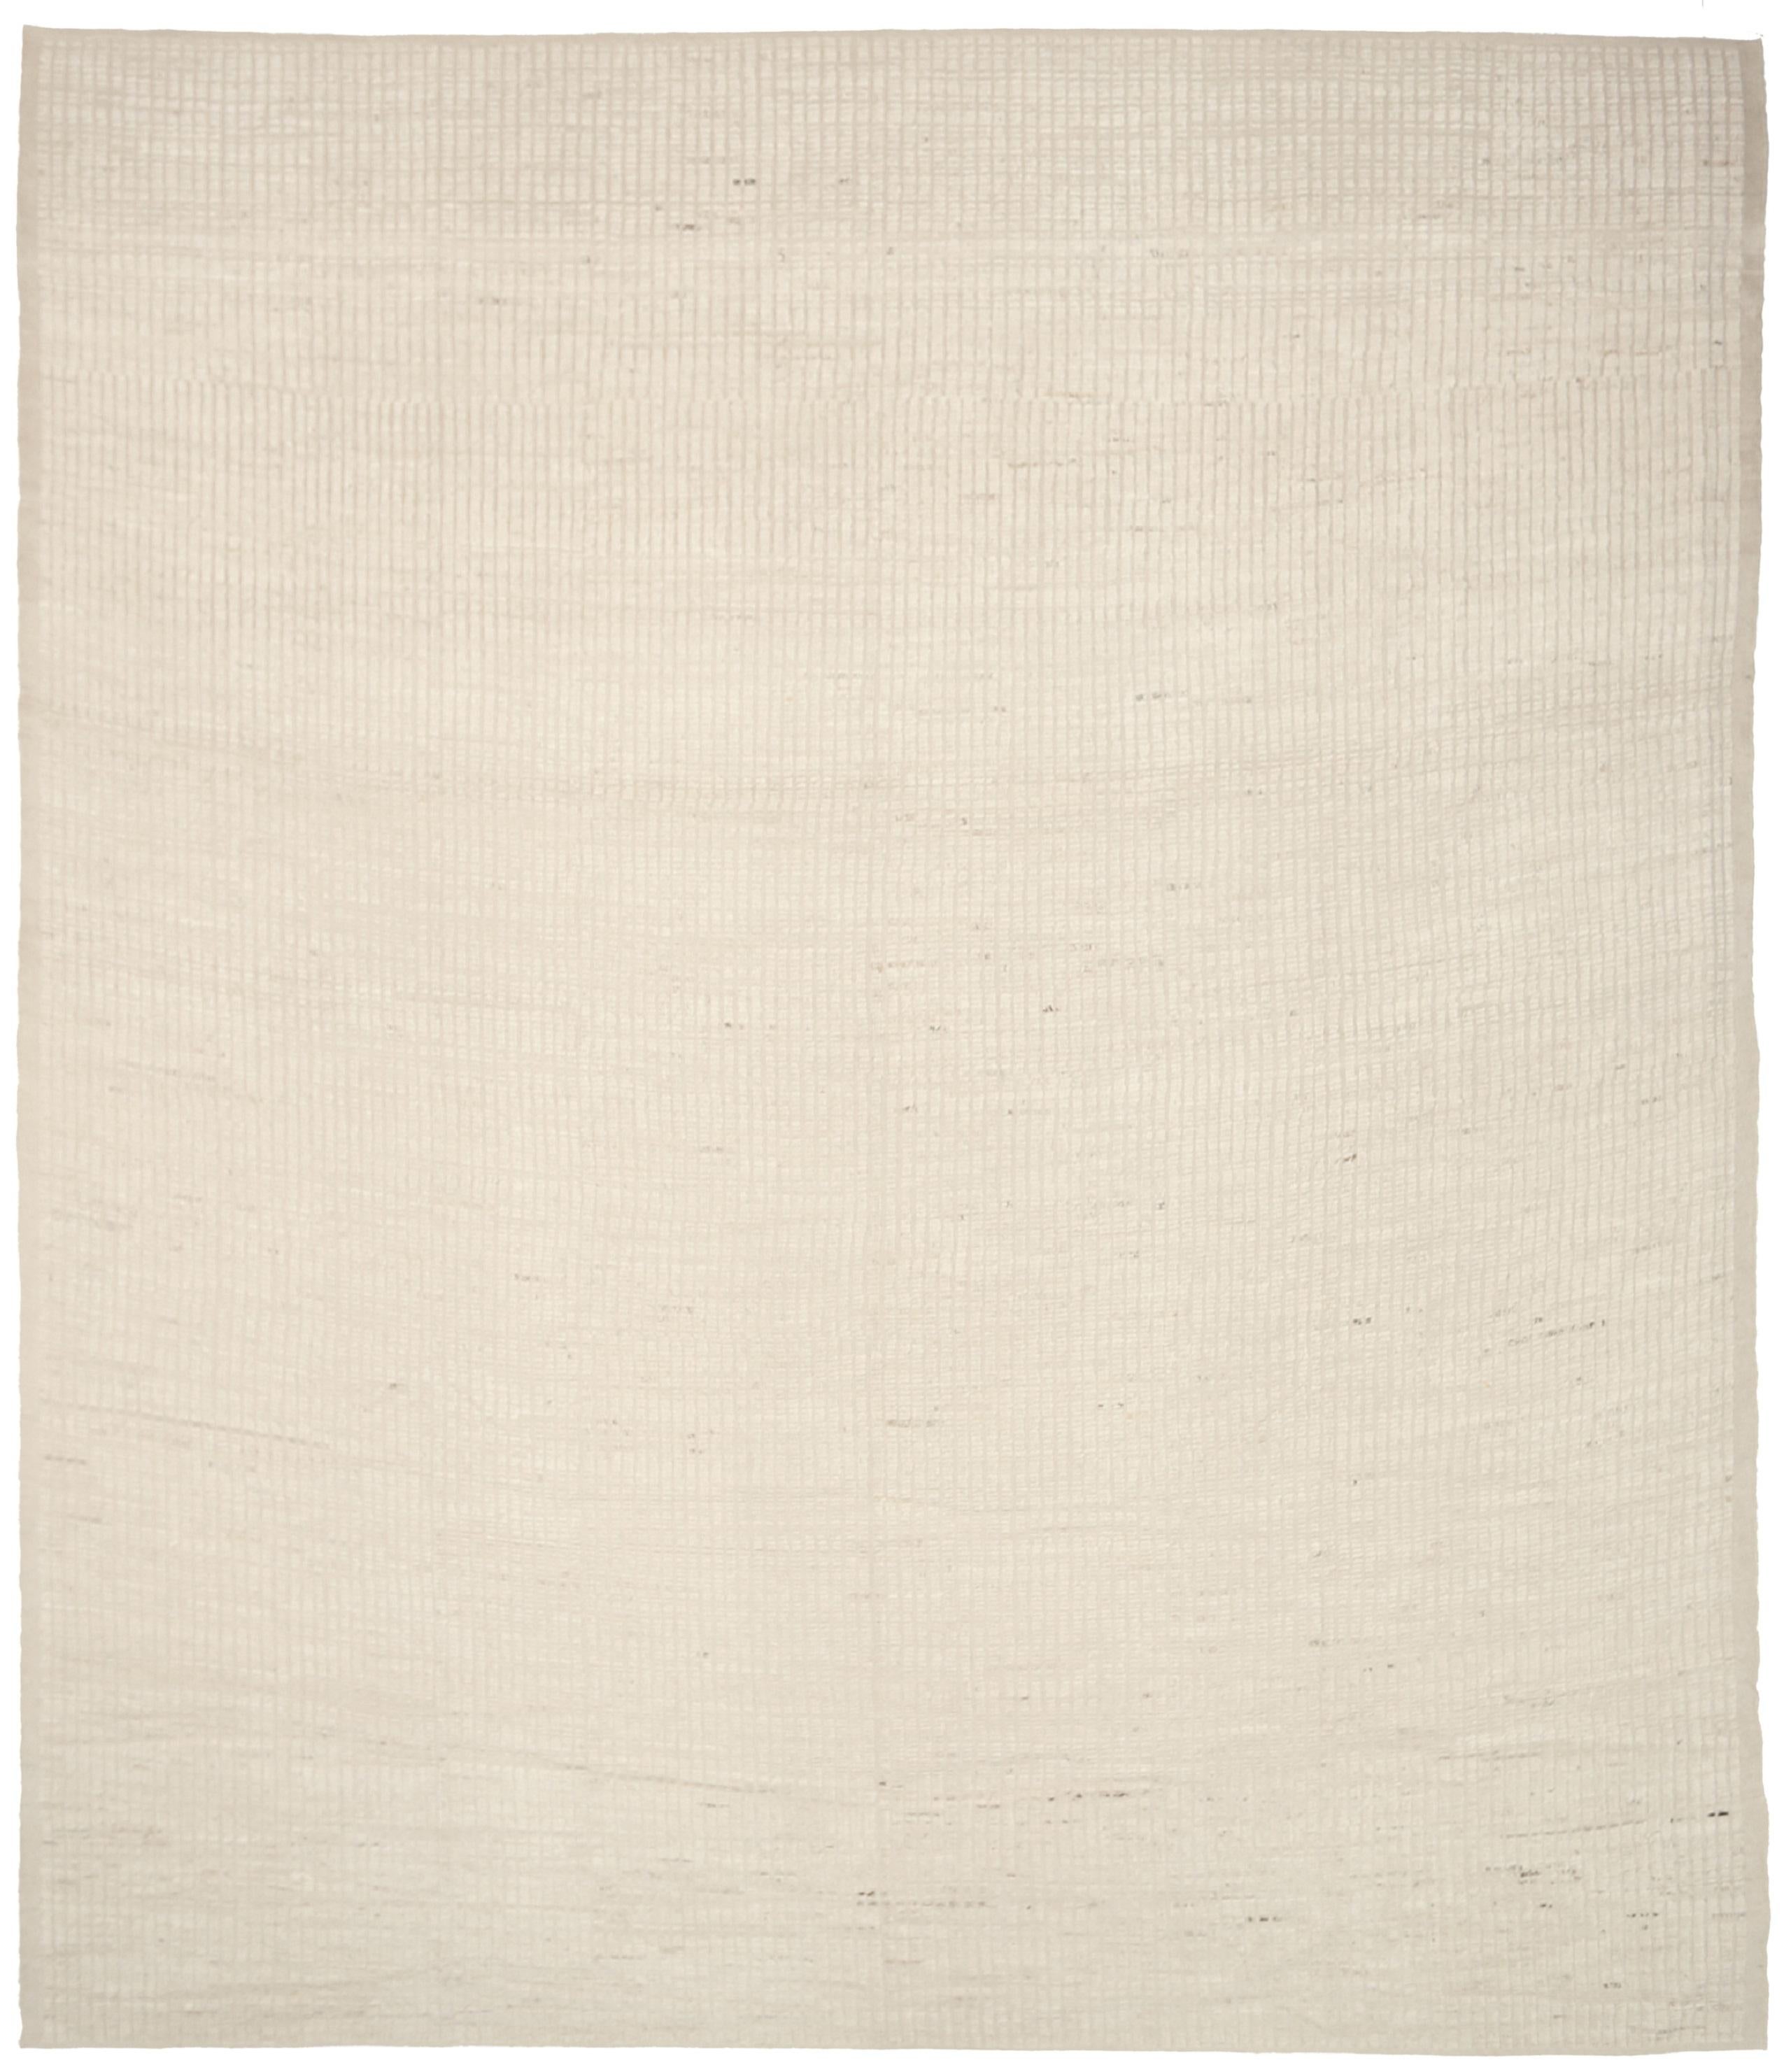 Contemporary Nazmiyal Collection Solid Ivory Modern Distressed Rug. 13 ft 7 in x 15 ft 8 in